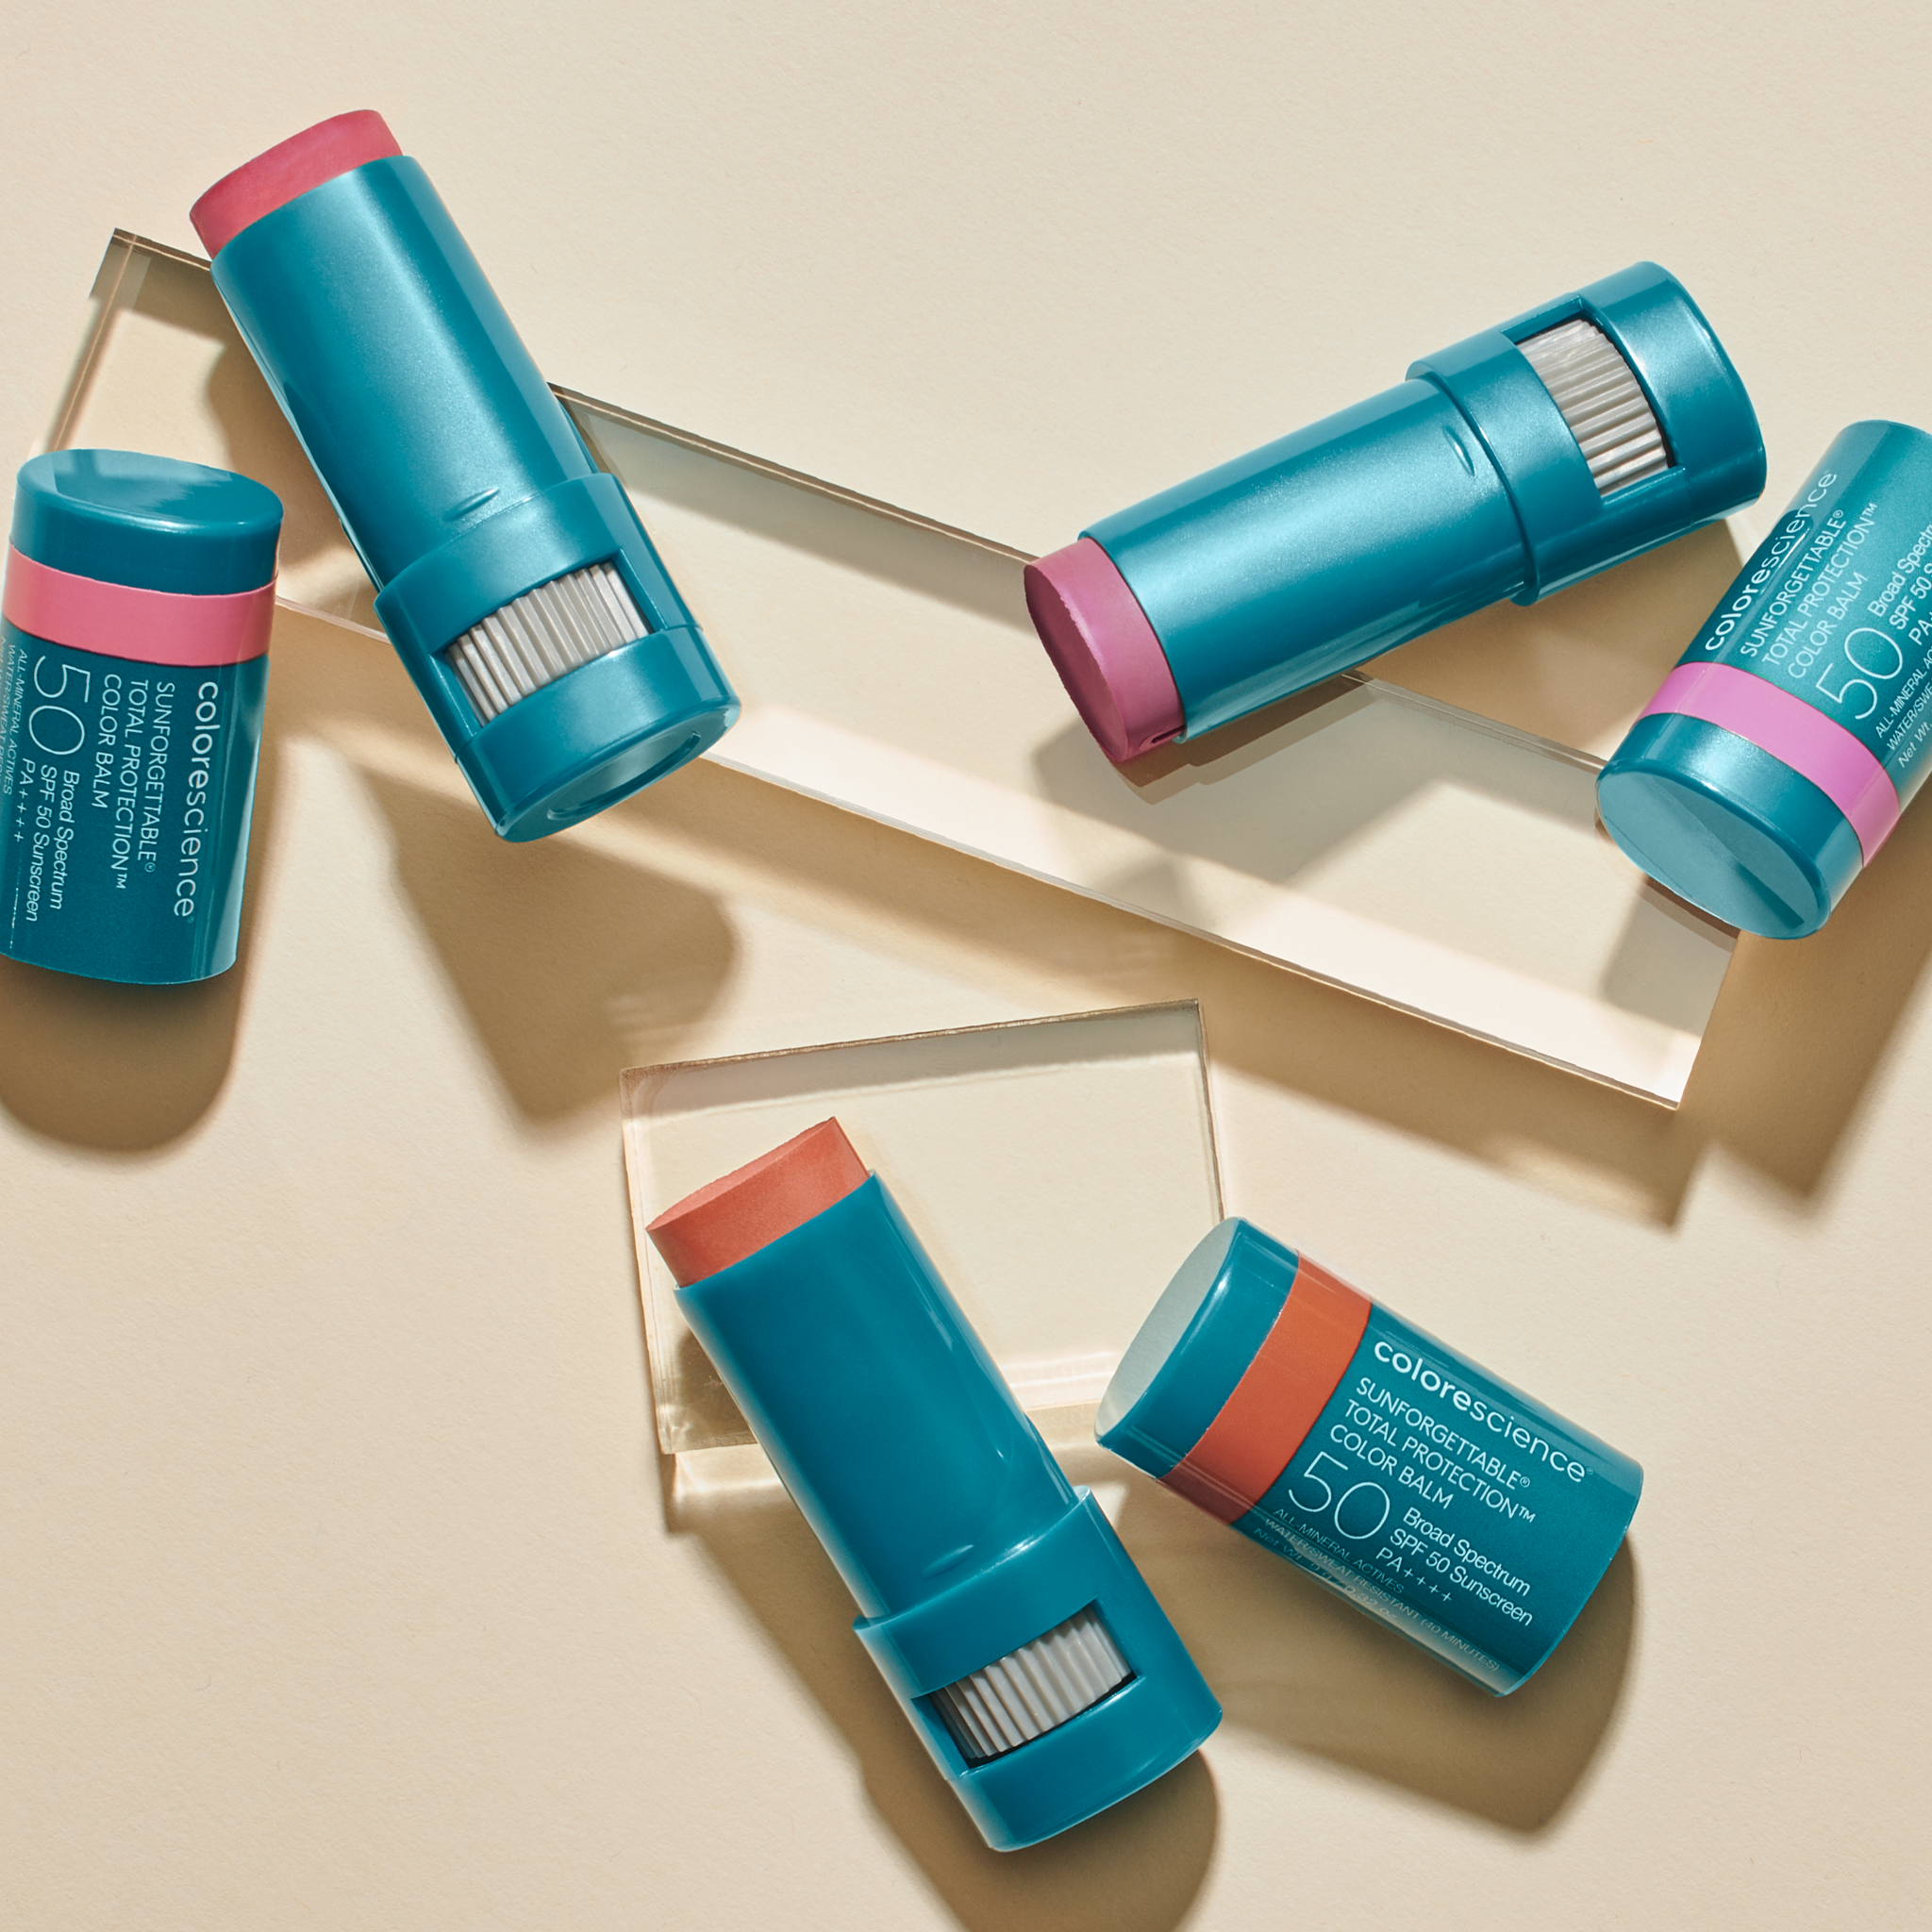 Sunforgettable® Total Protection™ Color Balm SPF 50 Endless Sunset Collection with cap off || all